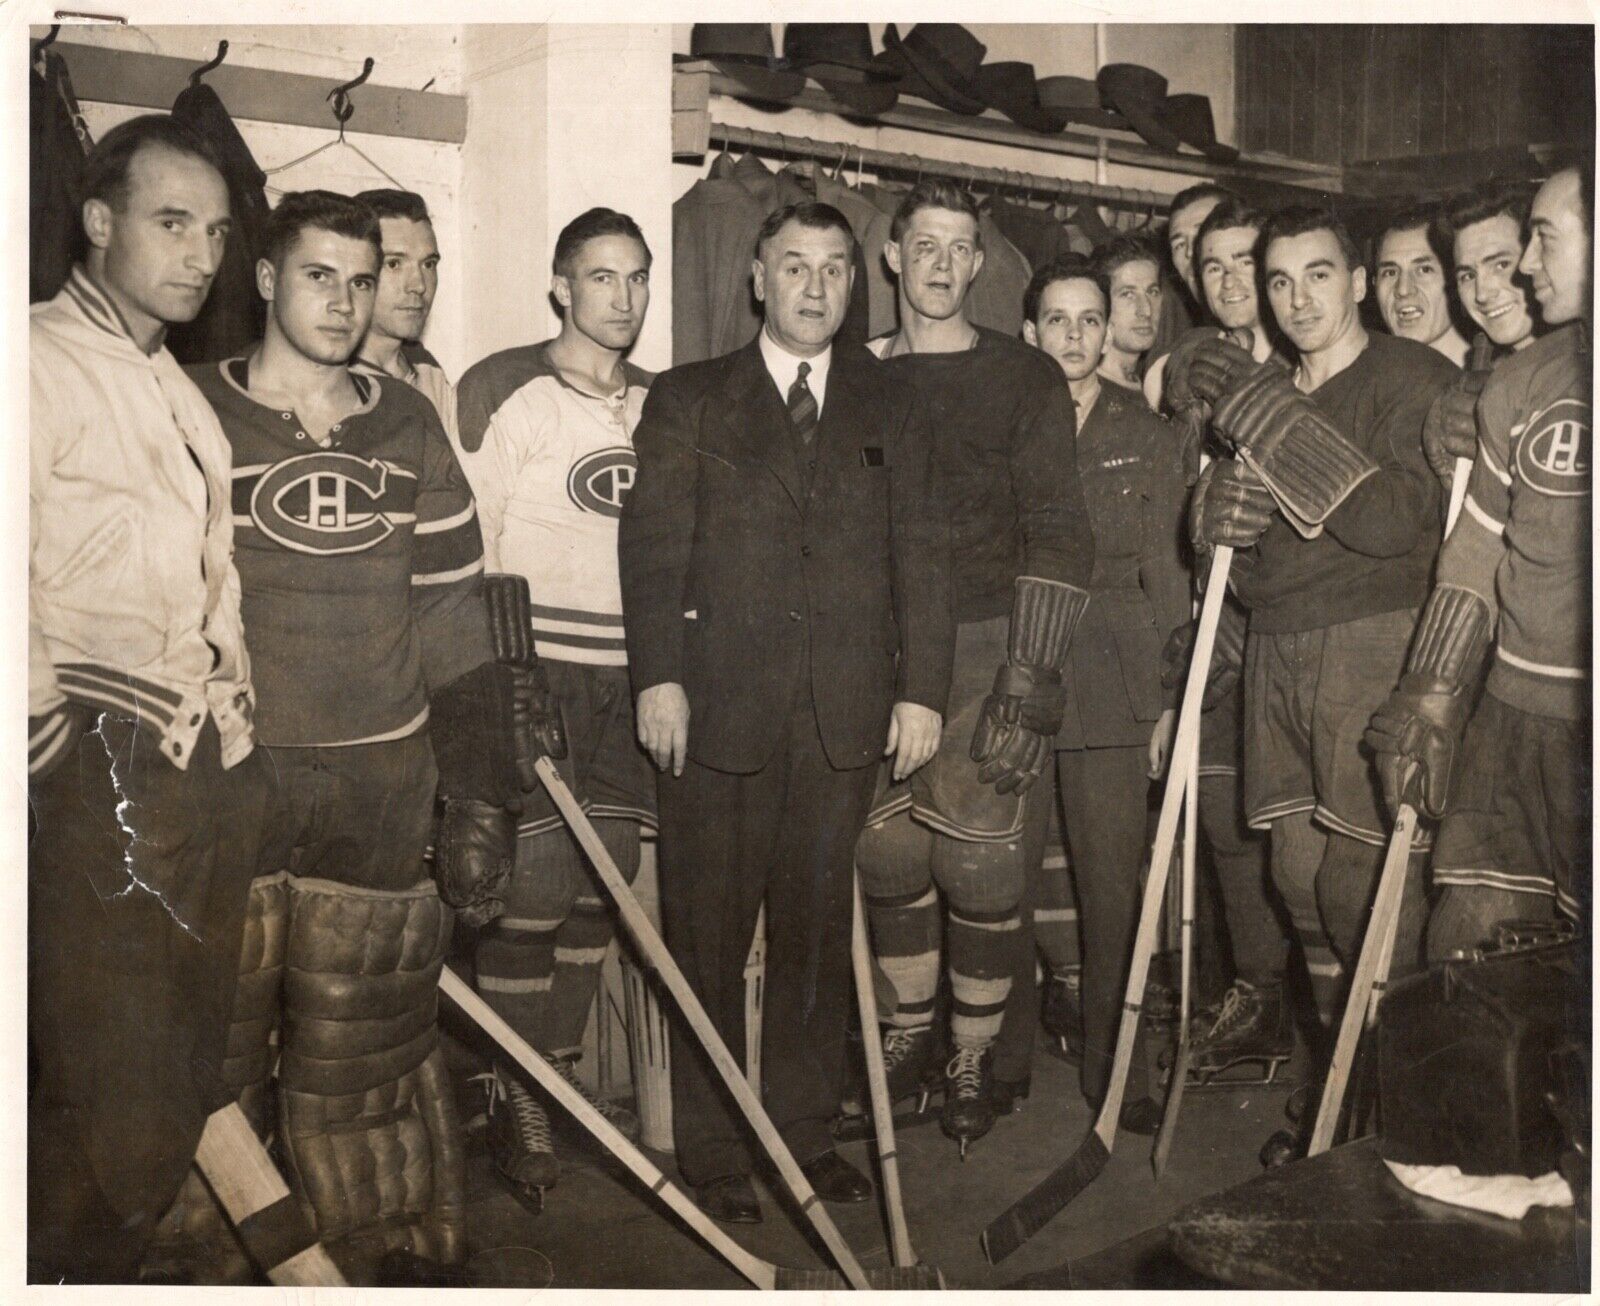 Original 1950's Photograph of the Montreal Canadians Hockey Team